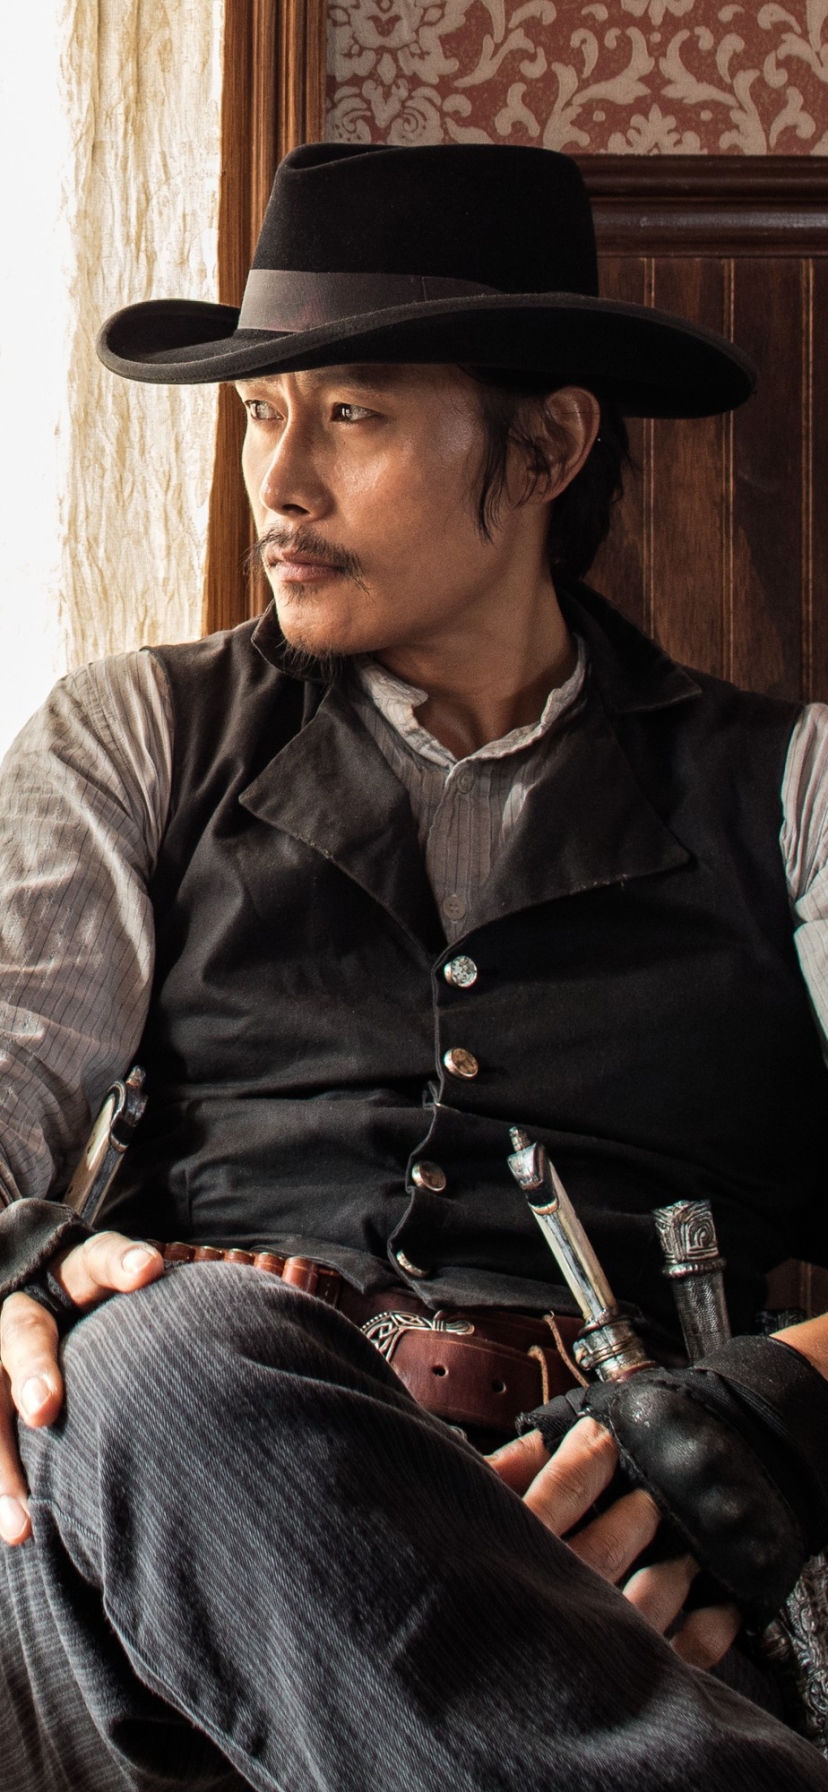 movie, the magnificent seven (2016), the magnificent seven, lee byung hun cellphone